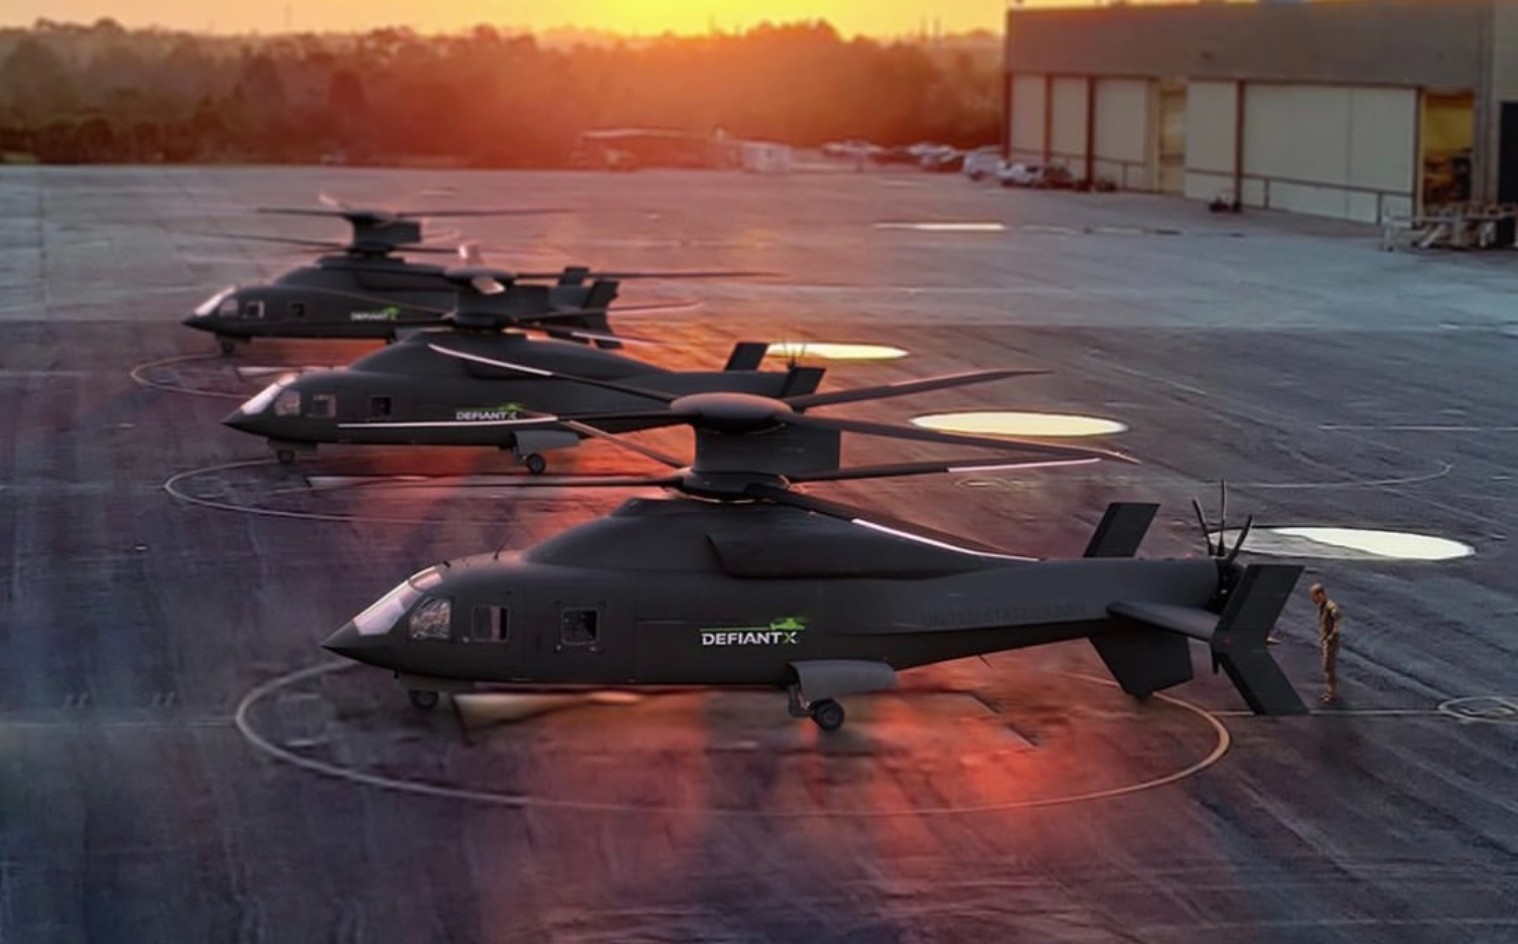 Sikorsky releases new video of Defiant X helicopter